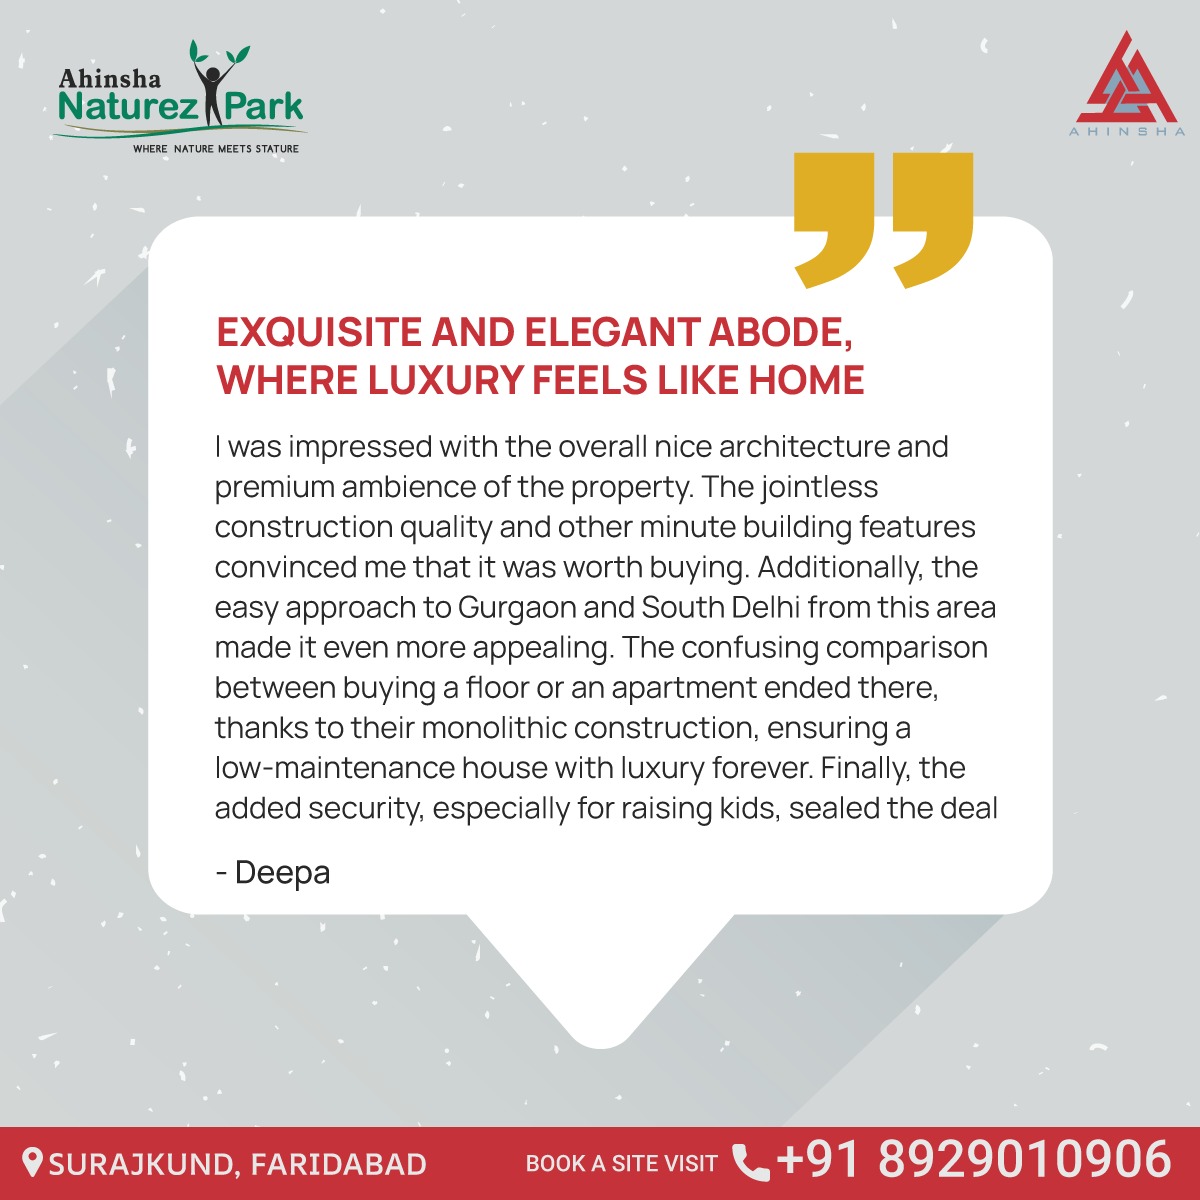 Exciting opportunities await with Aadinath Ur Homes this new financial year! Stay tuned for expert advice from our CEO. #AadinathUrHomes #SuccessAhead  #CEOInsights #FinancialYear #OpportunitiesAwait  #WealthBuilding #FuturePlanning #AadinathIndia #OfficeSpace #RetailSpace